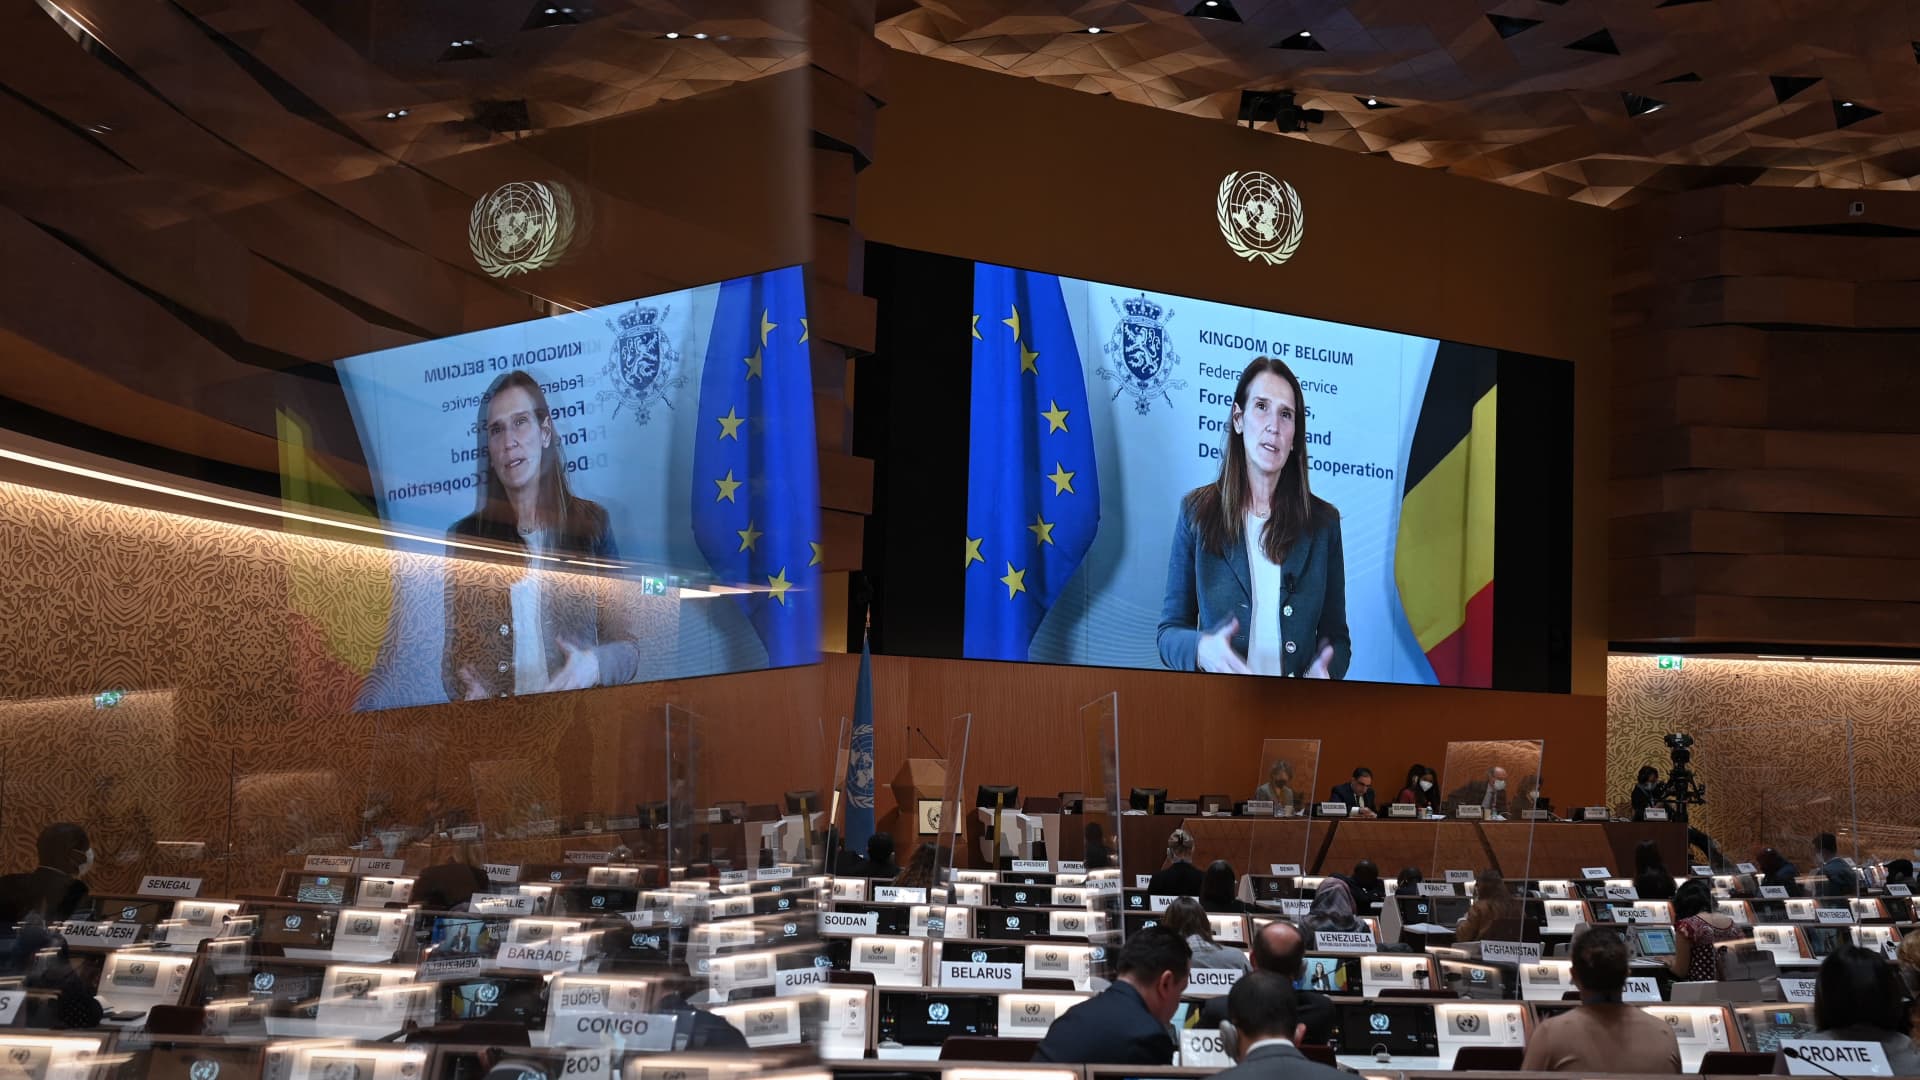 Belgian Foreign Minister Sophie Wilmes delivers a remote speech at the opening of a session of the U.N. Human Rights Council in Geneva on February 28, 2022.